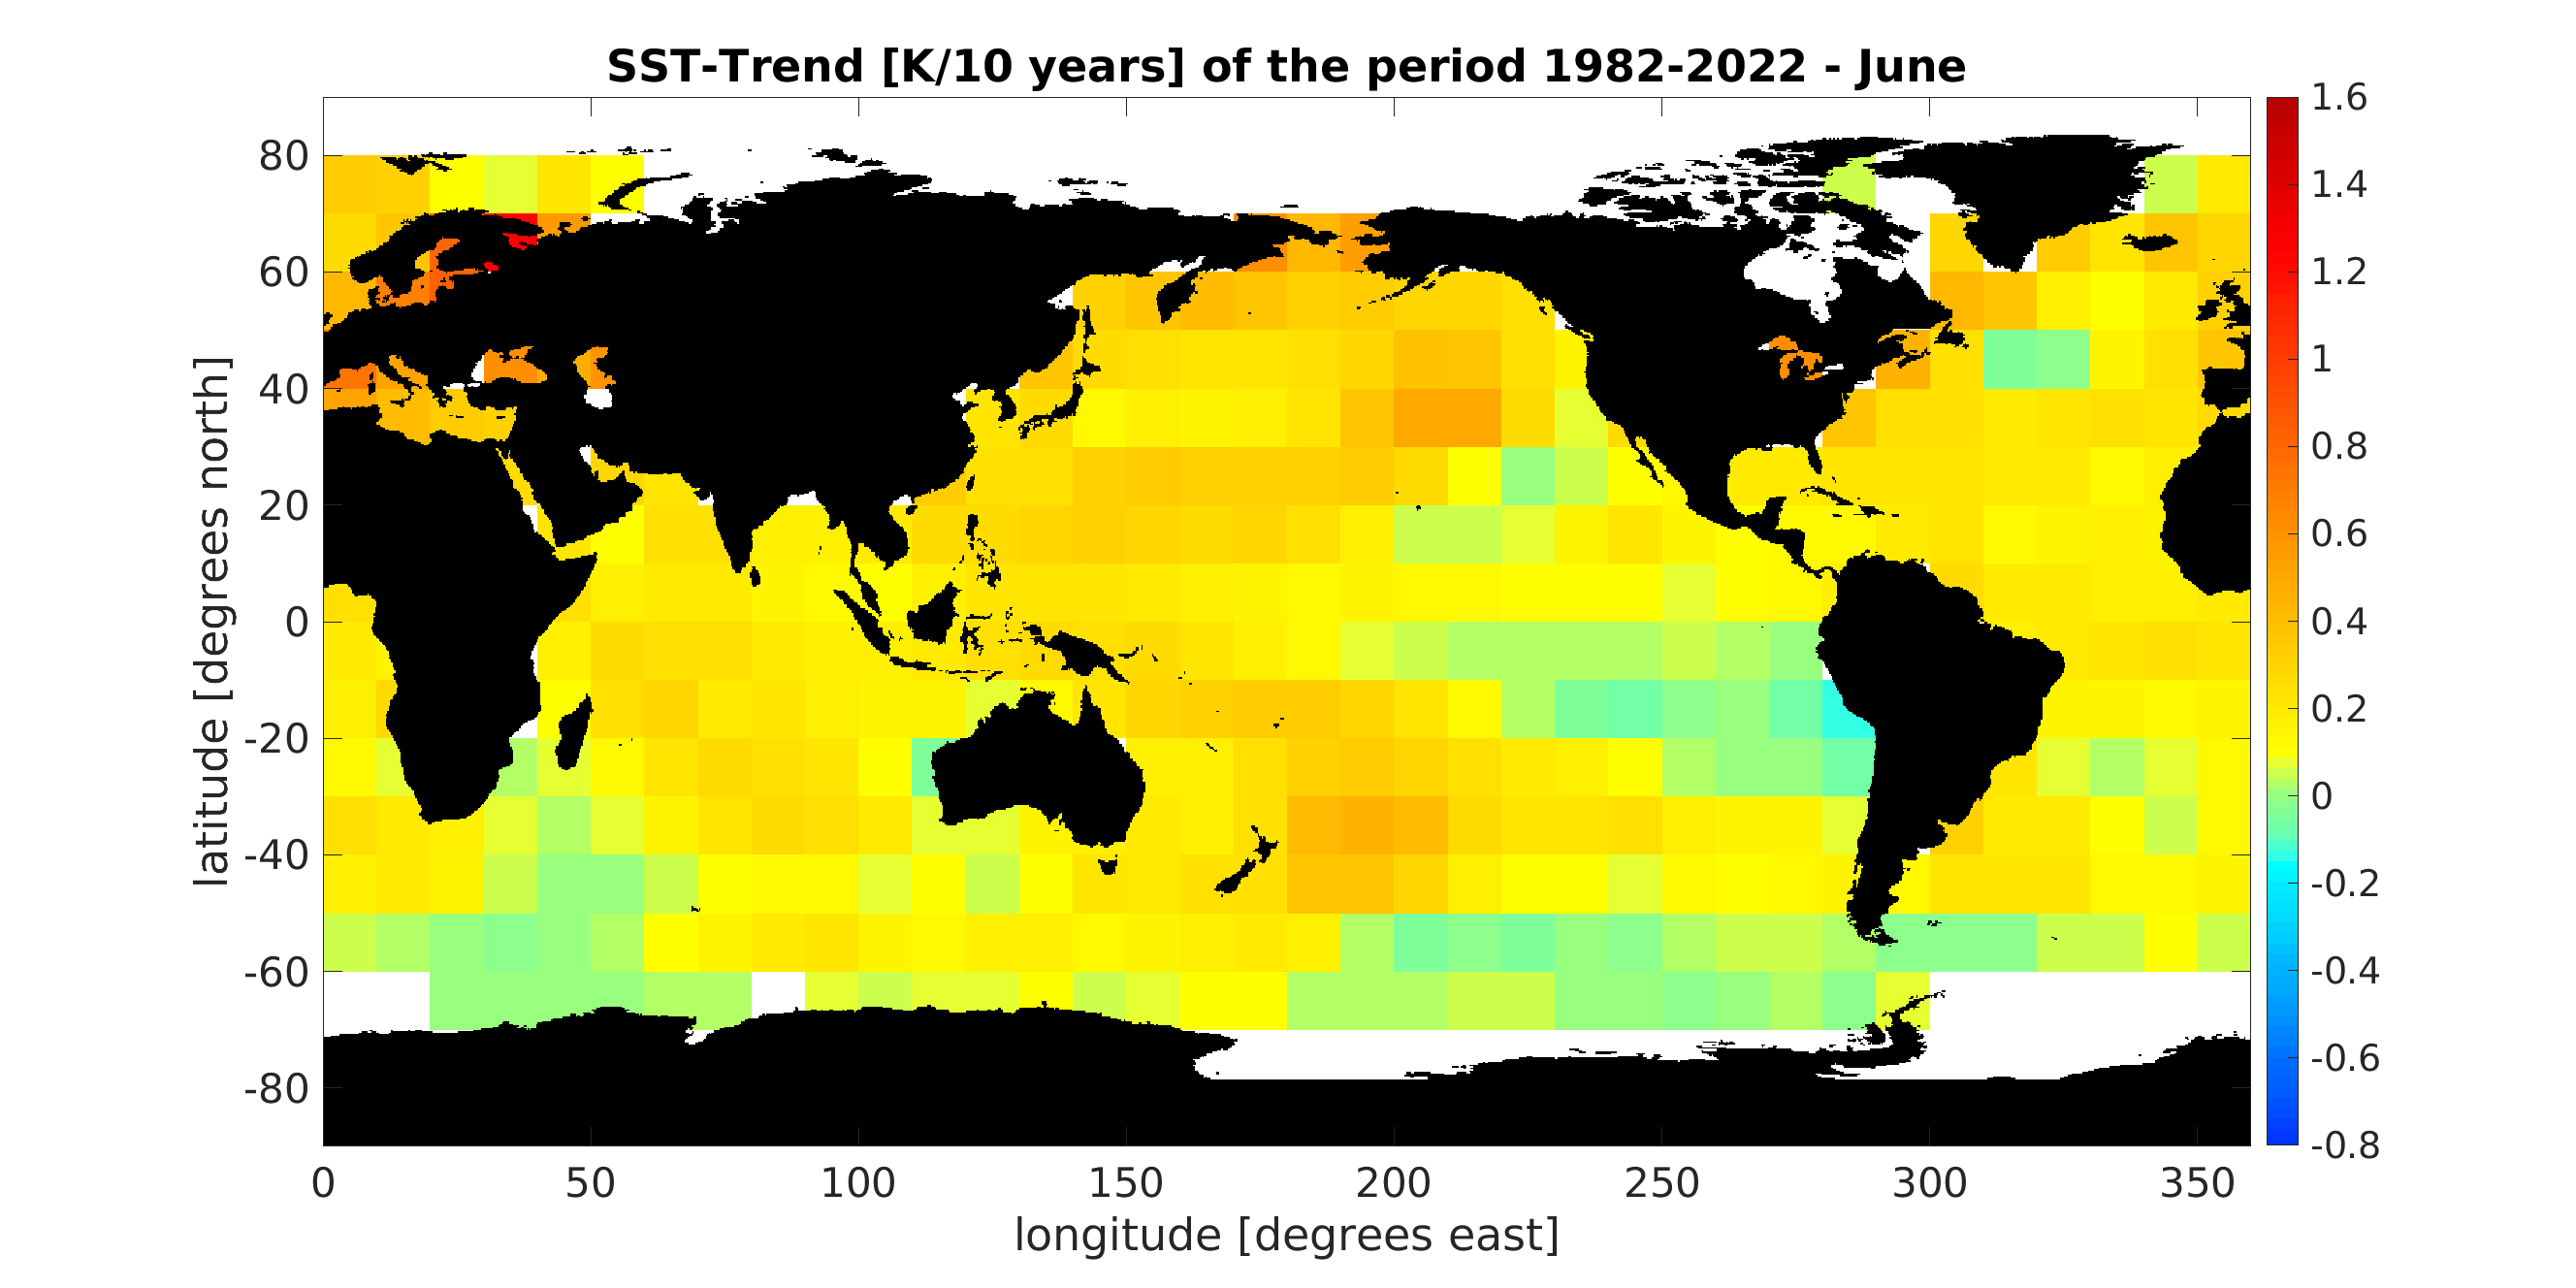 Maps of the SST trend for each month for the period 1982-2020 JUN